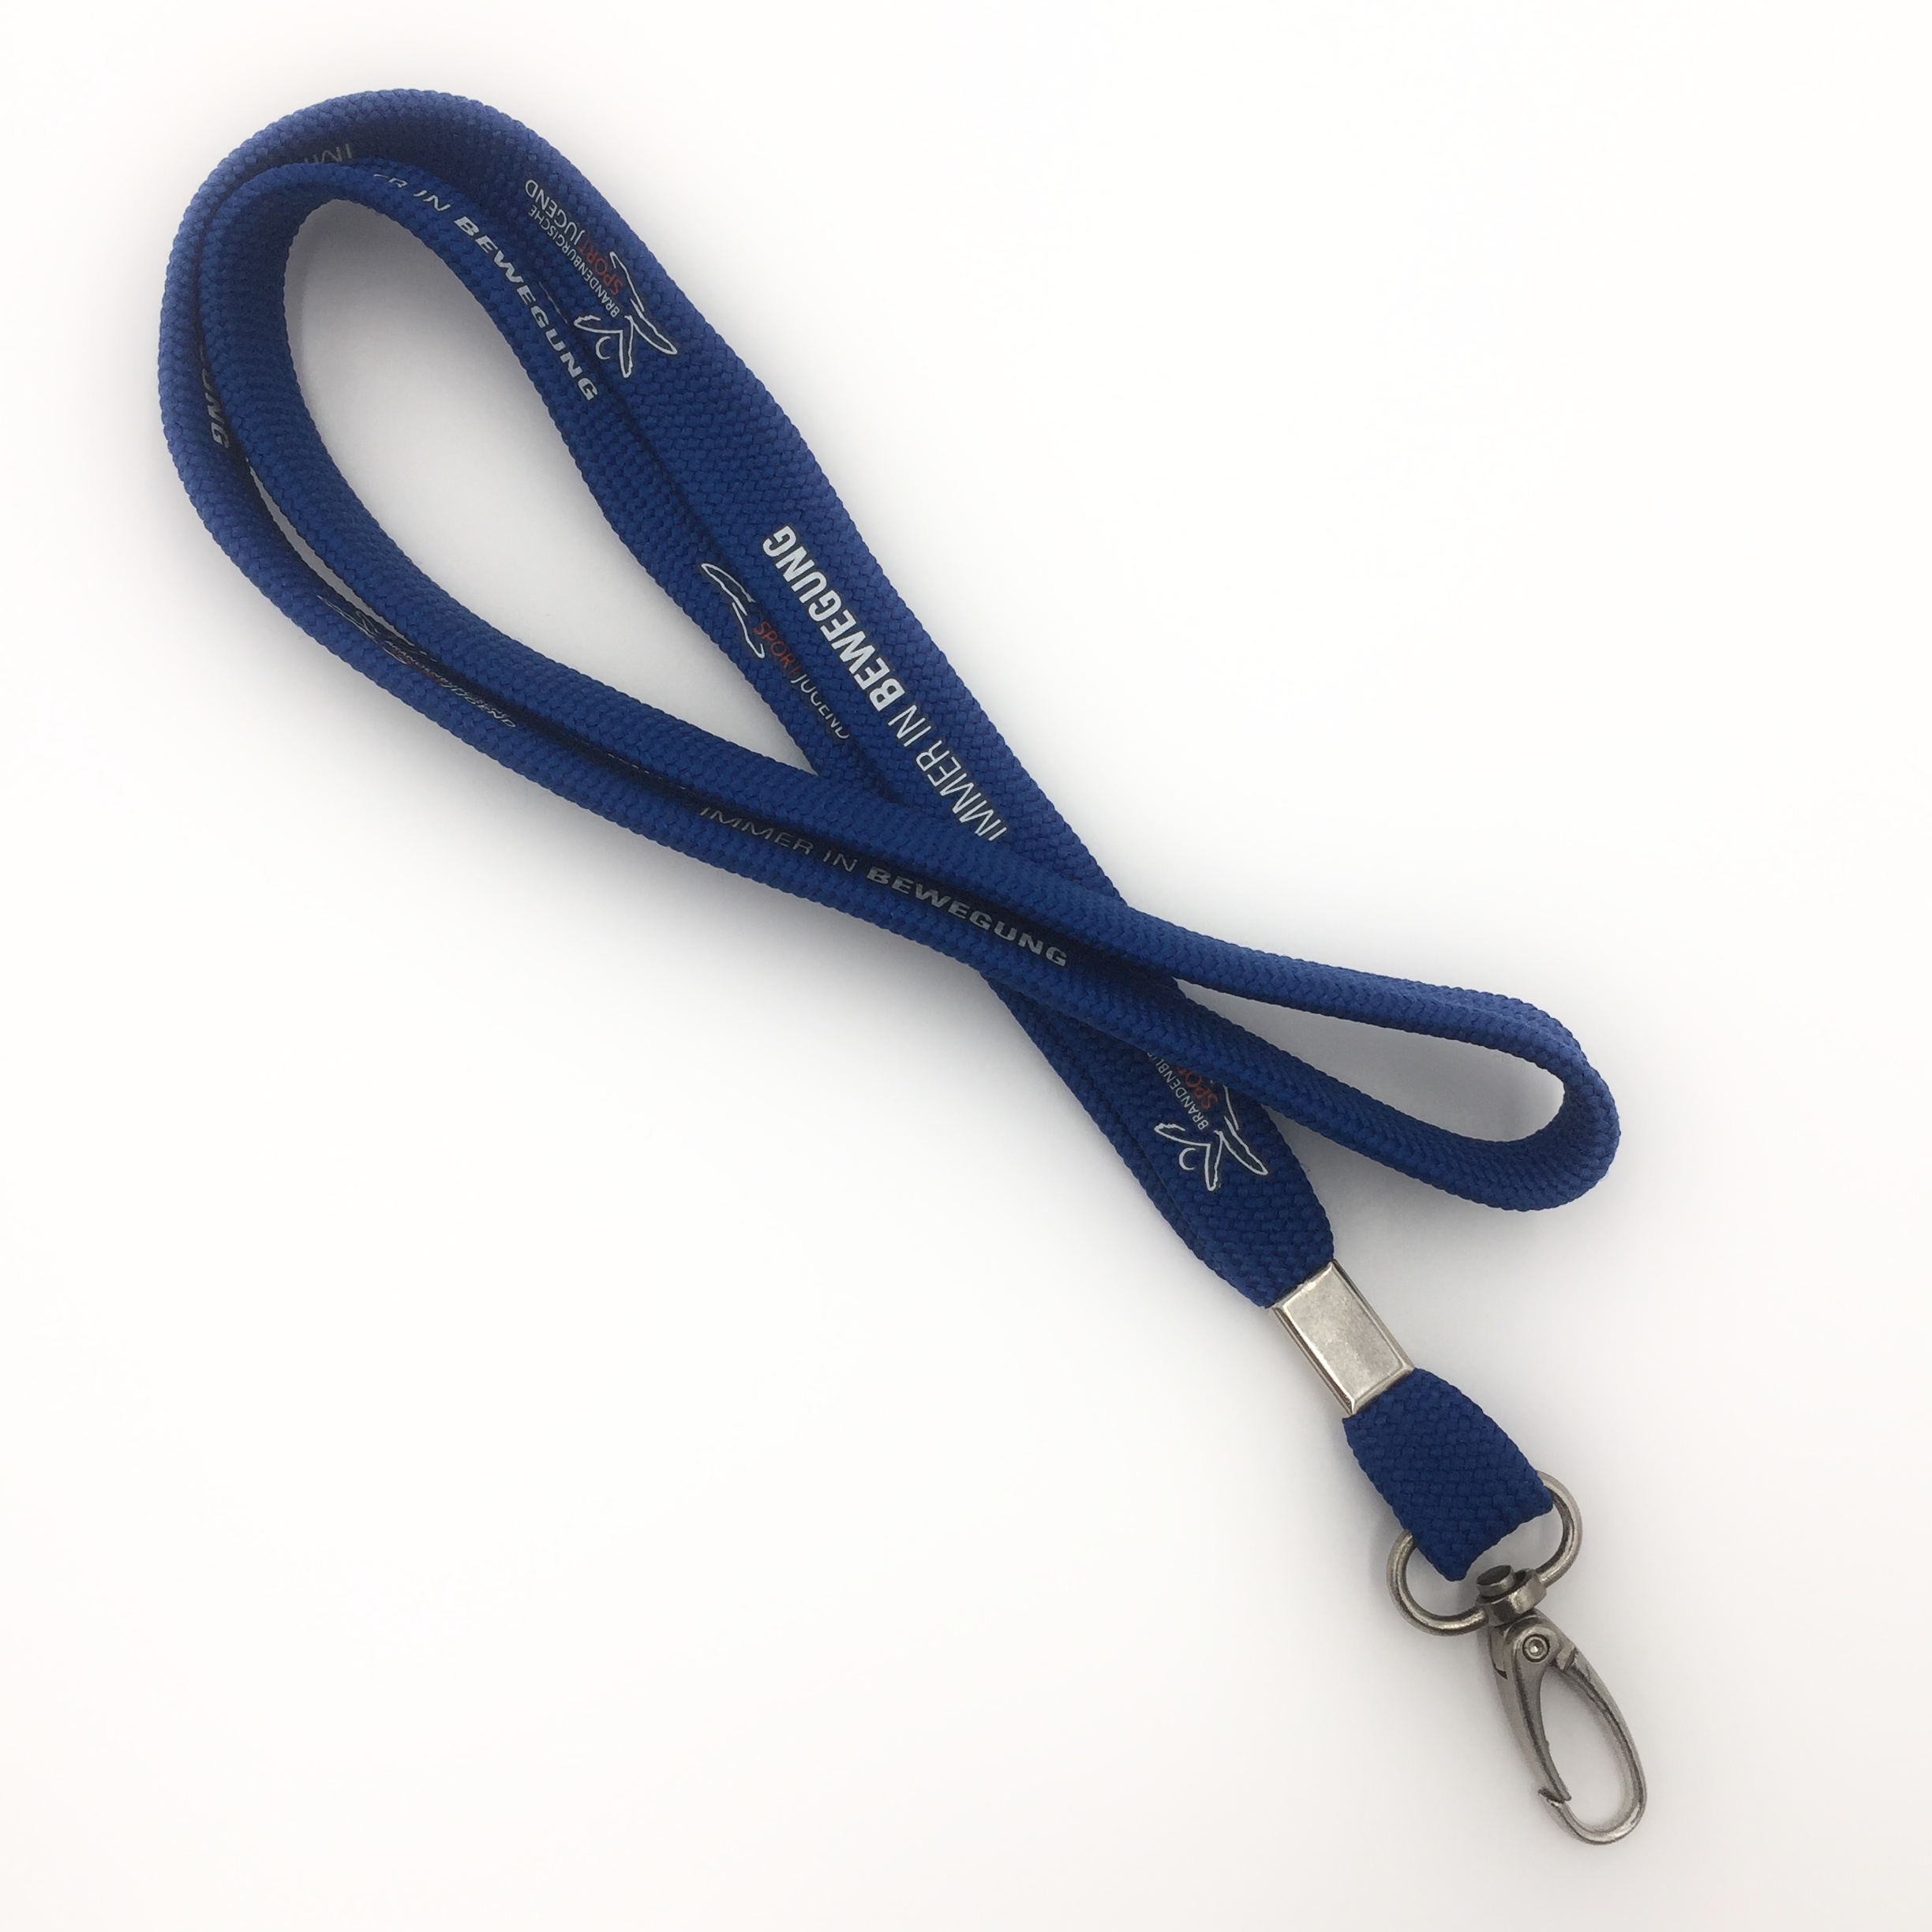 High Density ECO Customize Cord Lanyards With Your Own Graphical Design In Exhibition Trade Show Event